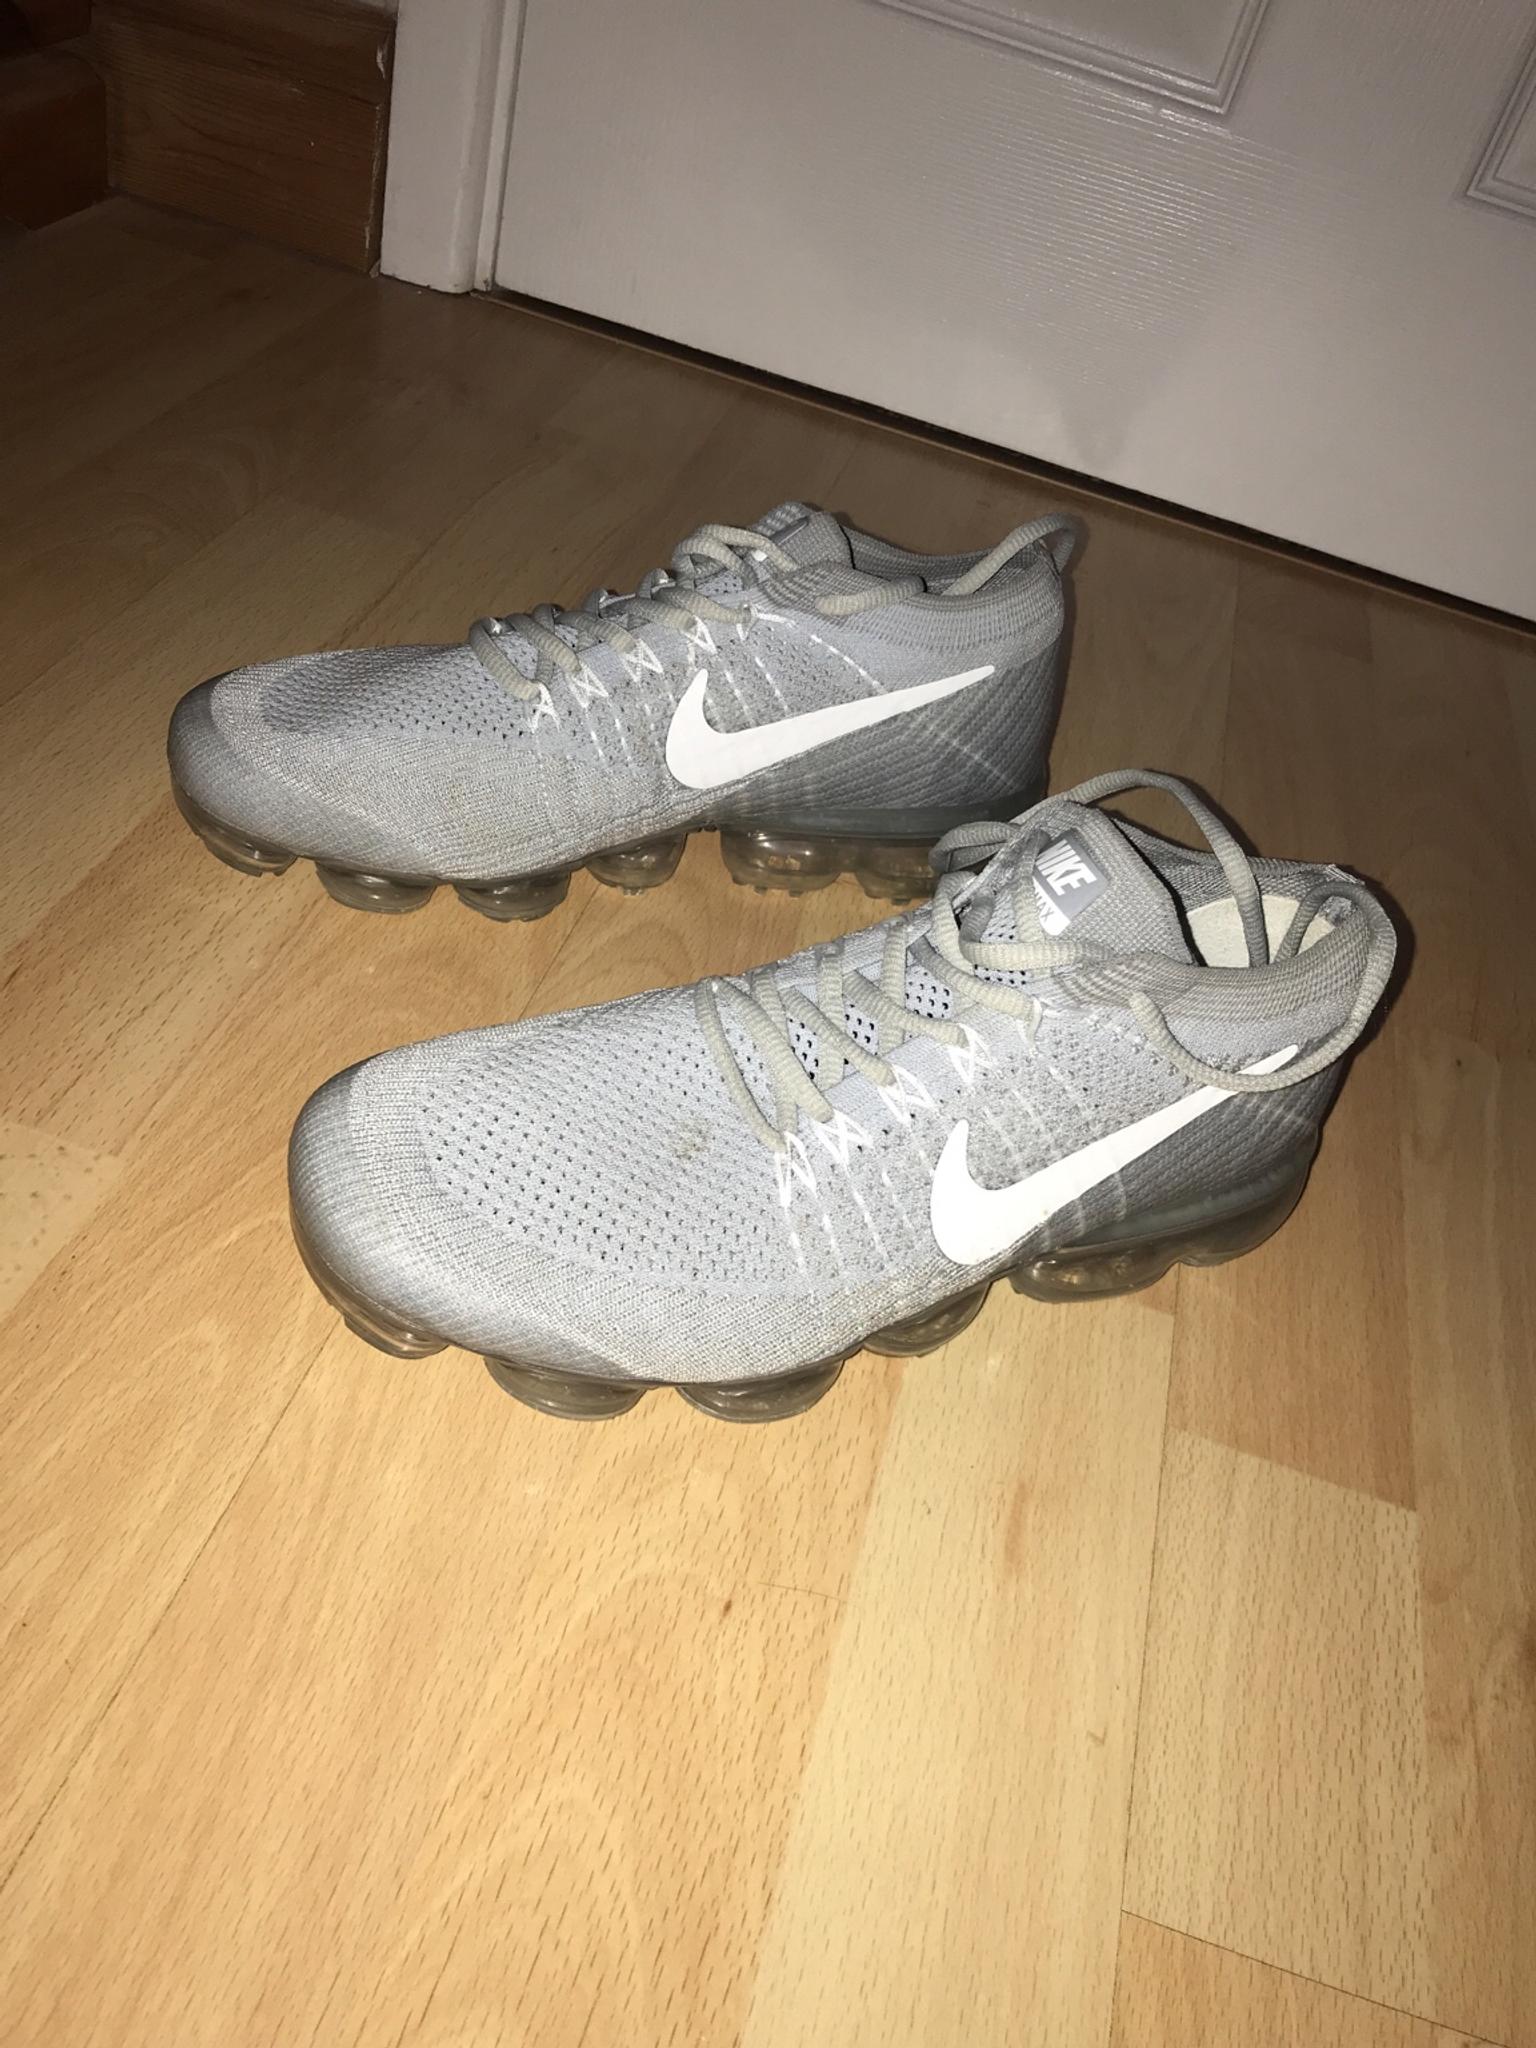 Nike air vapormax in Plymouth for £30.00 for sale | Shpock